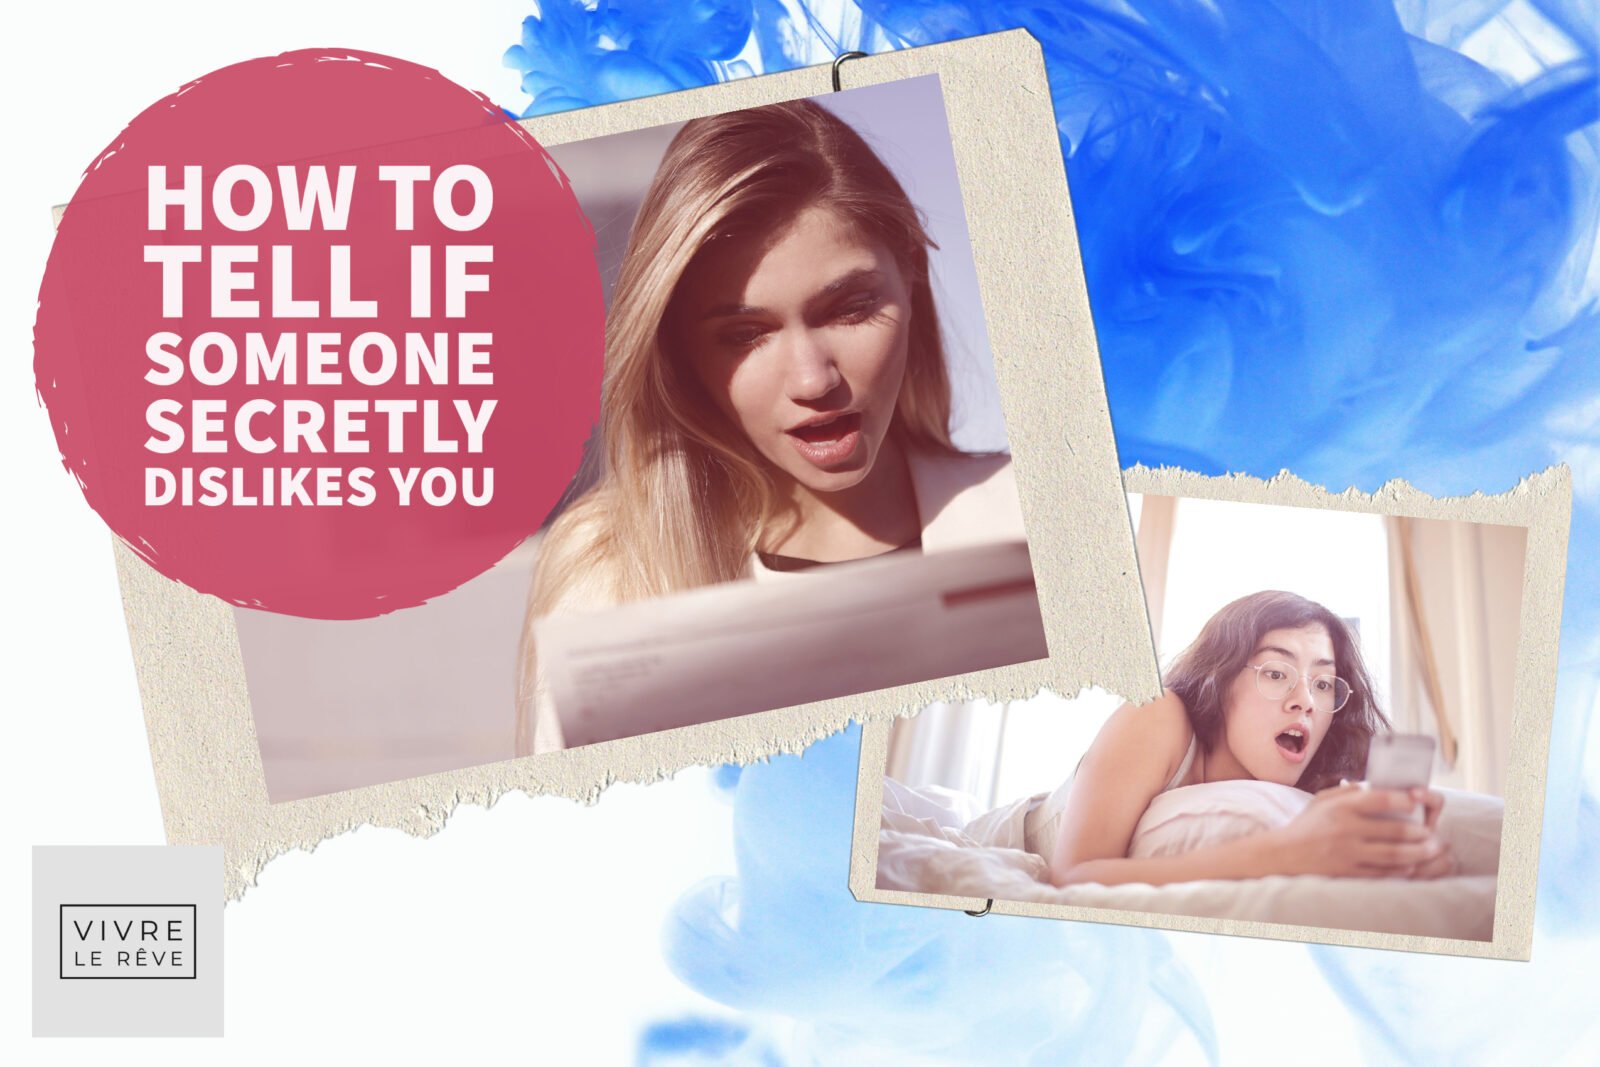 How to Tell if Someone Secretly Dislikes You